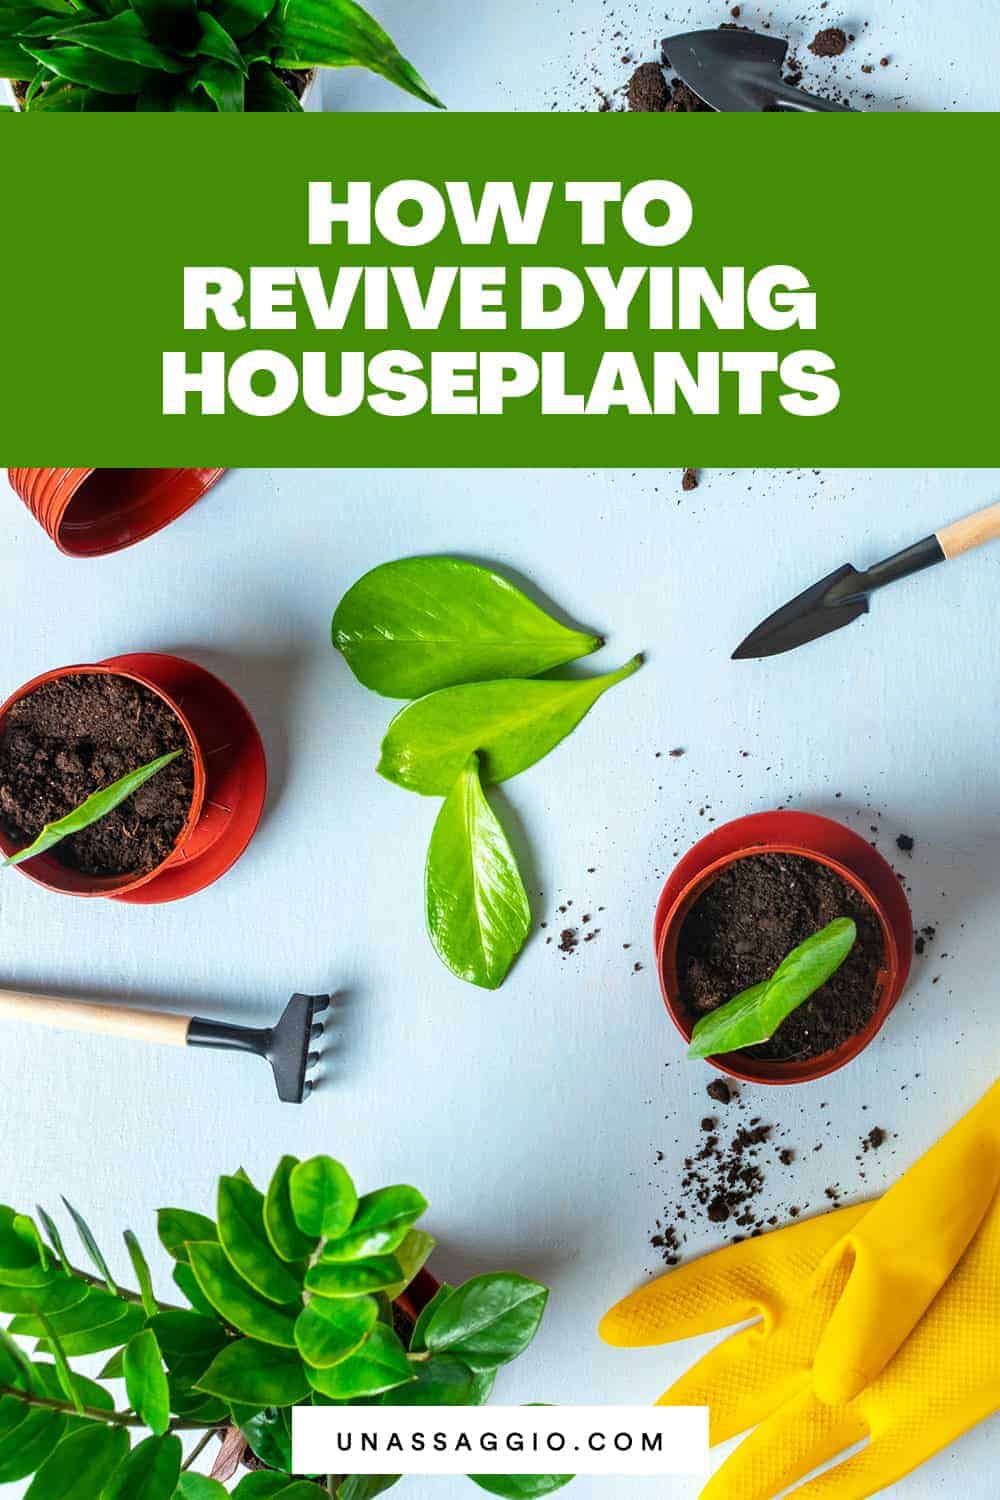 How to revive dying houseplants?